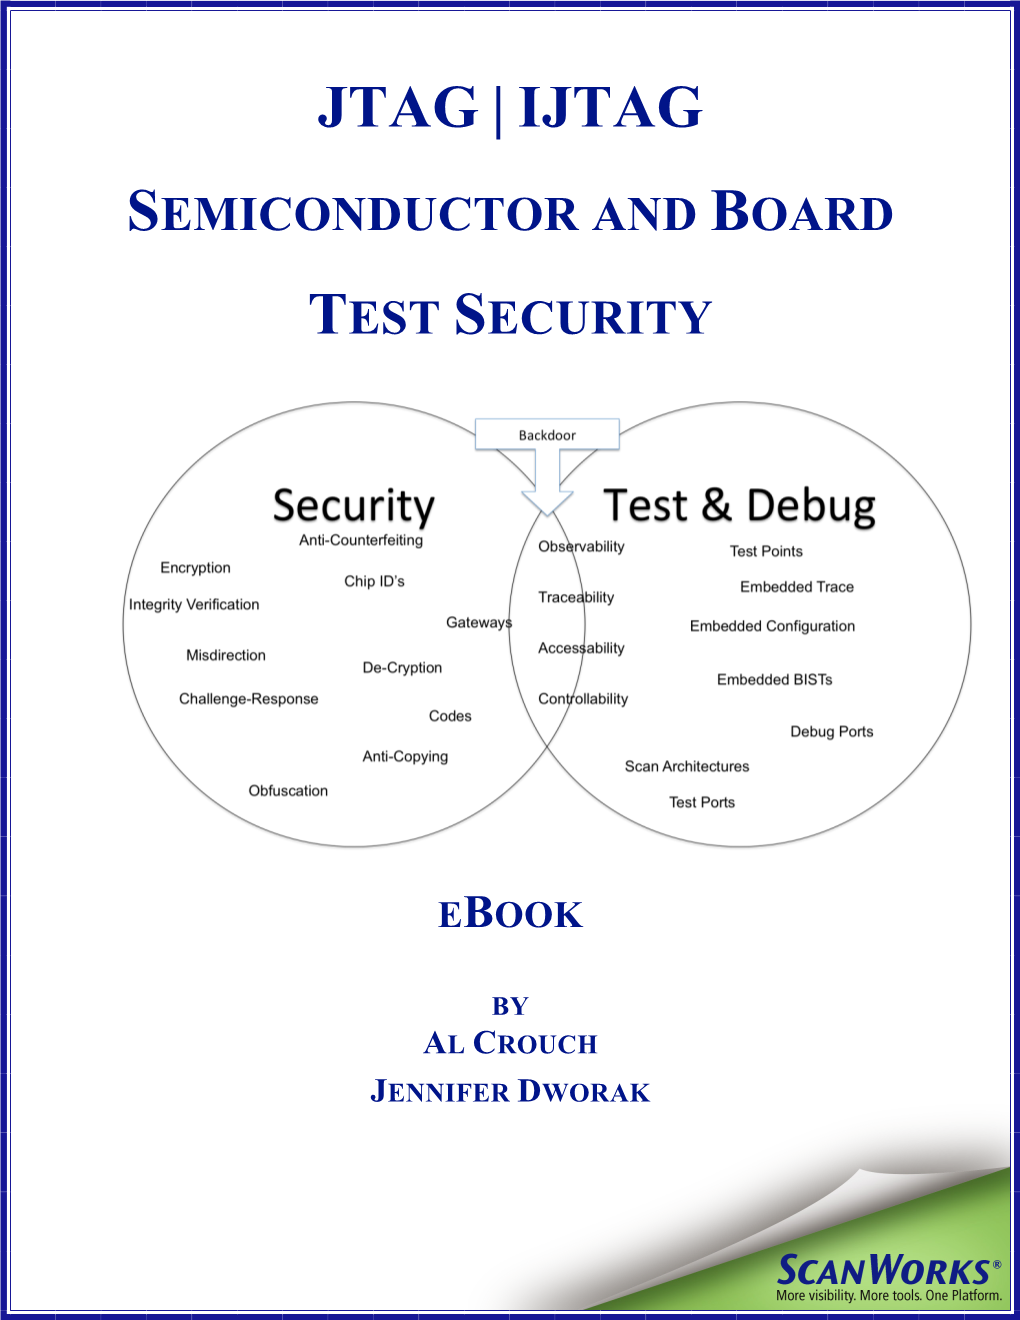 Jtag | Ijtag Semiconductor and Board Test Security